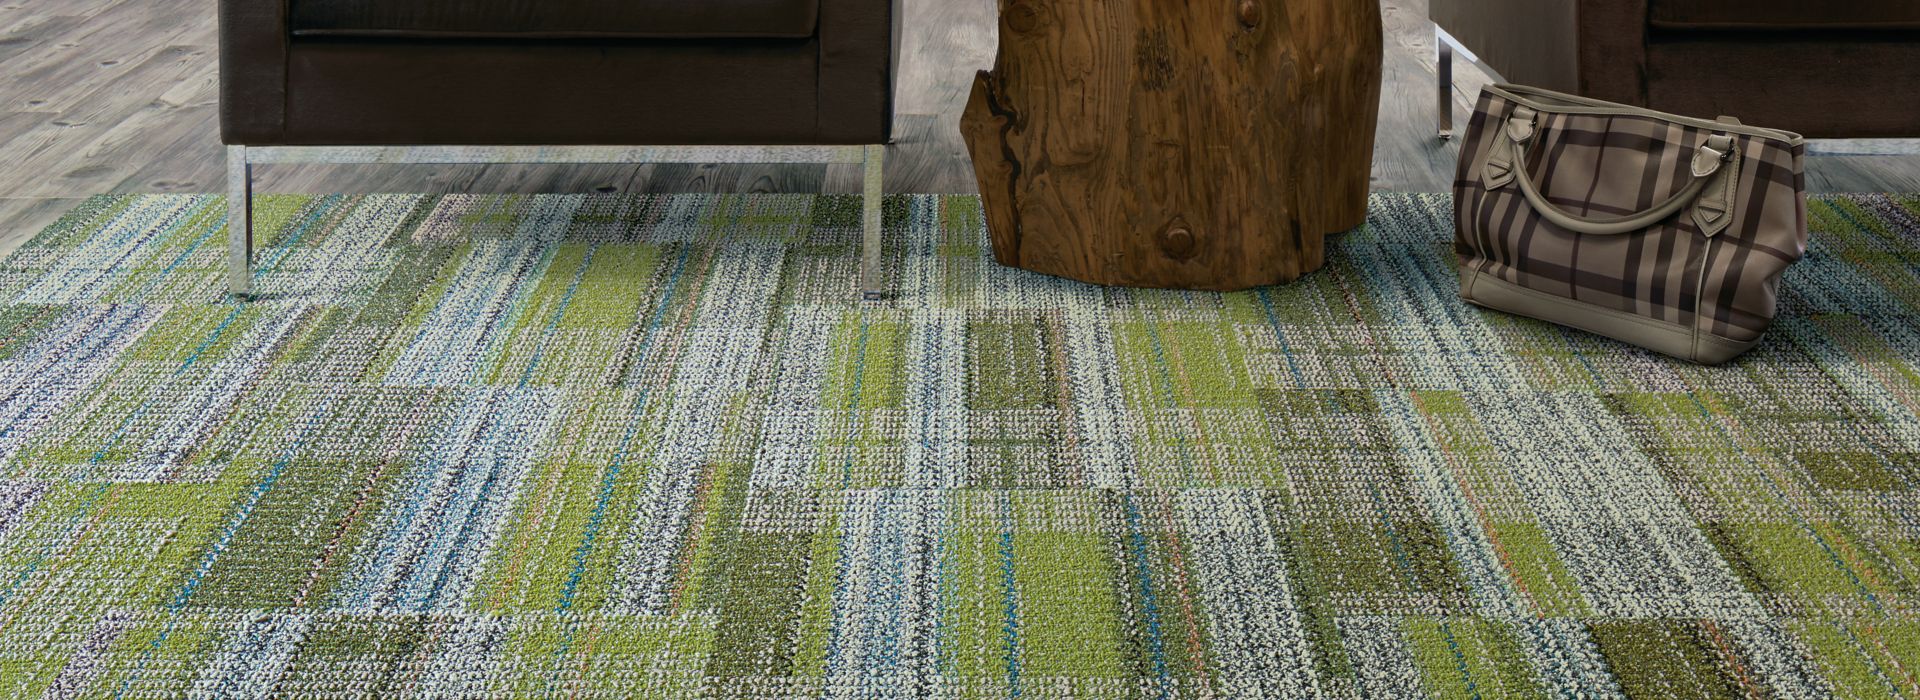 Interface Summerhouse Brights carpet tile and Natural Woodgrains LVT in seating area with black chairs imagen número 1